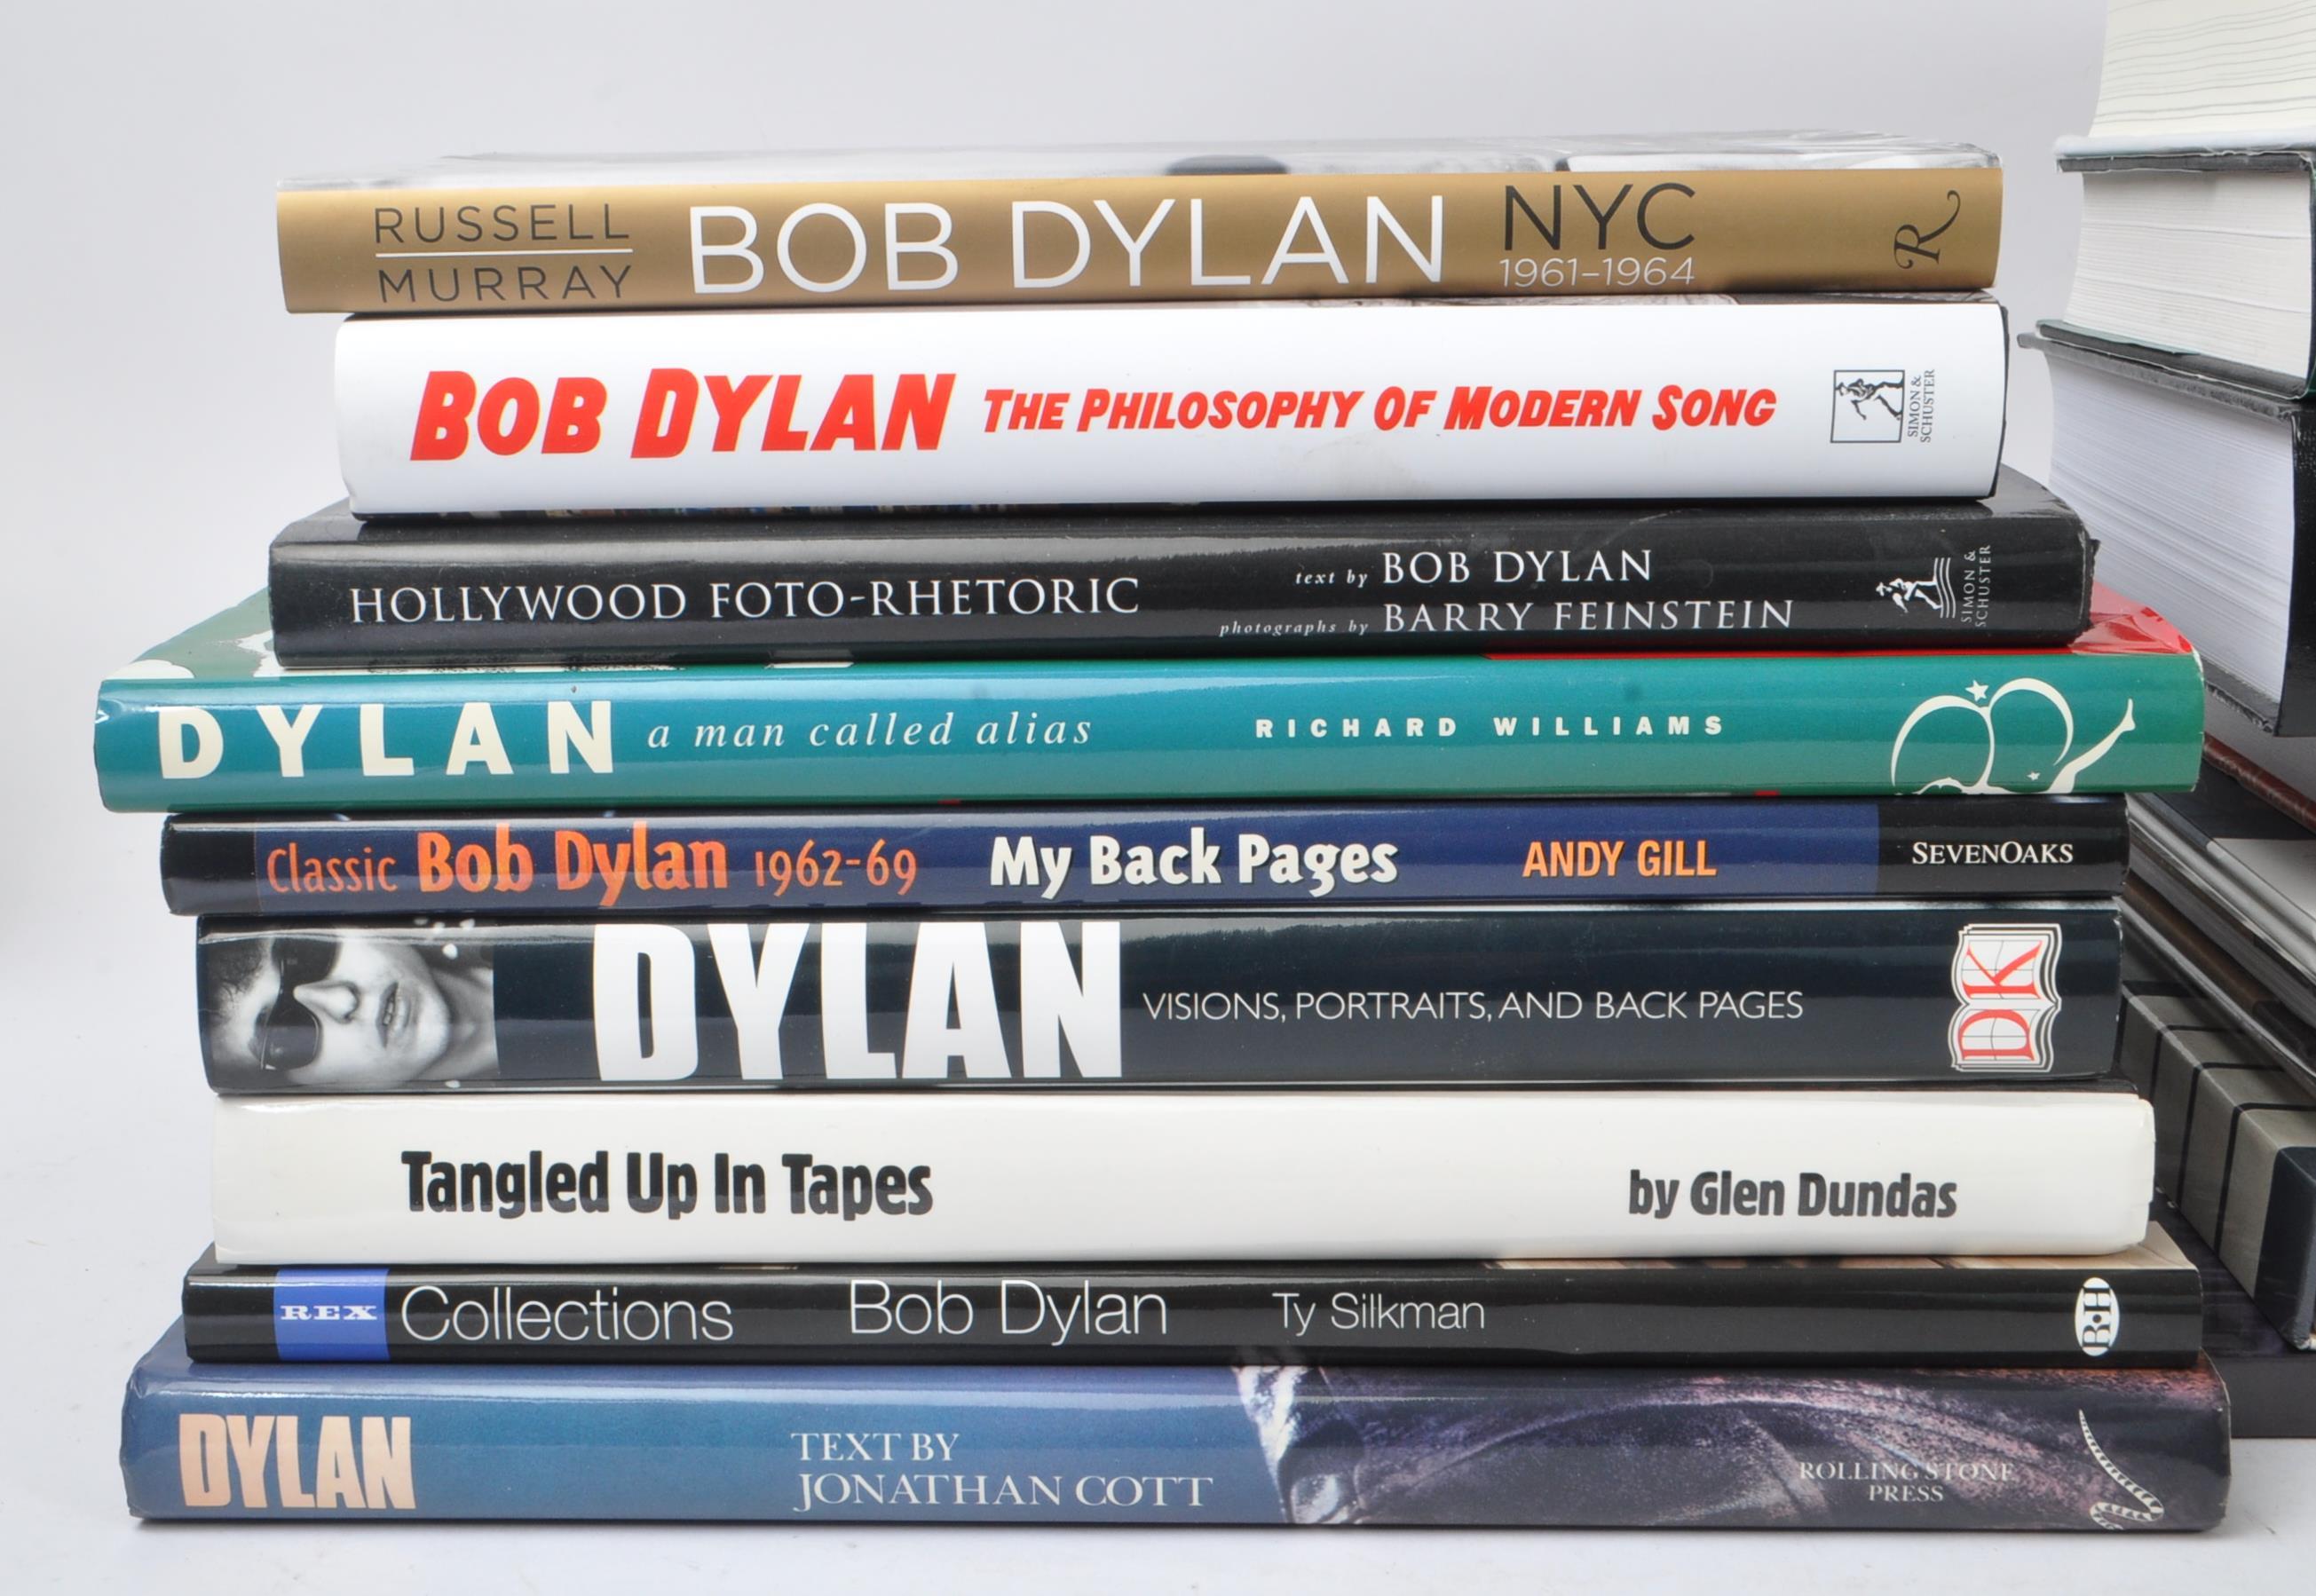 BOB DYLAN - COLLECTION OF MUSIC REFERENCE BOOK - Image 10 of 10